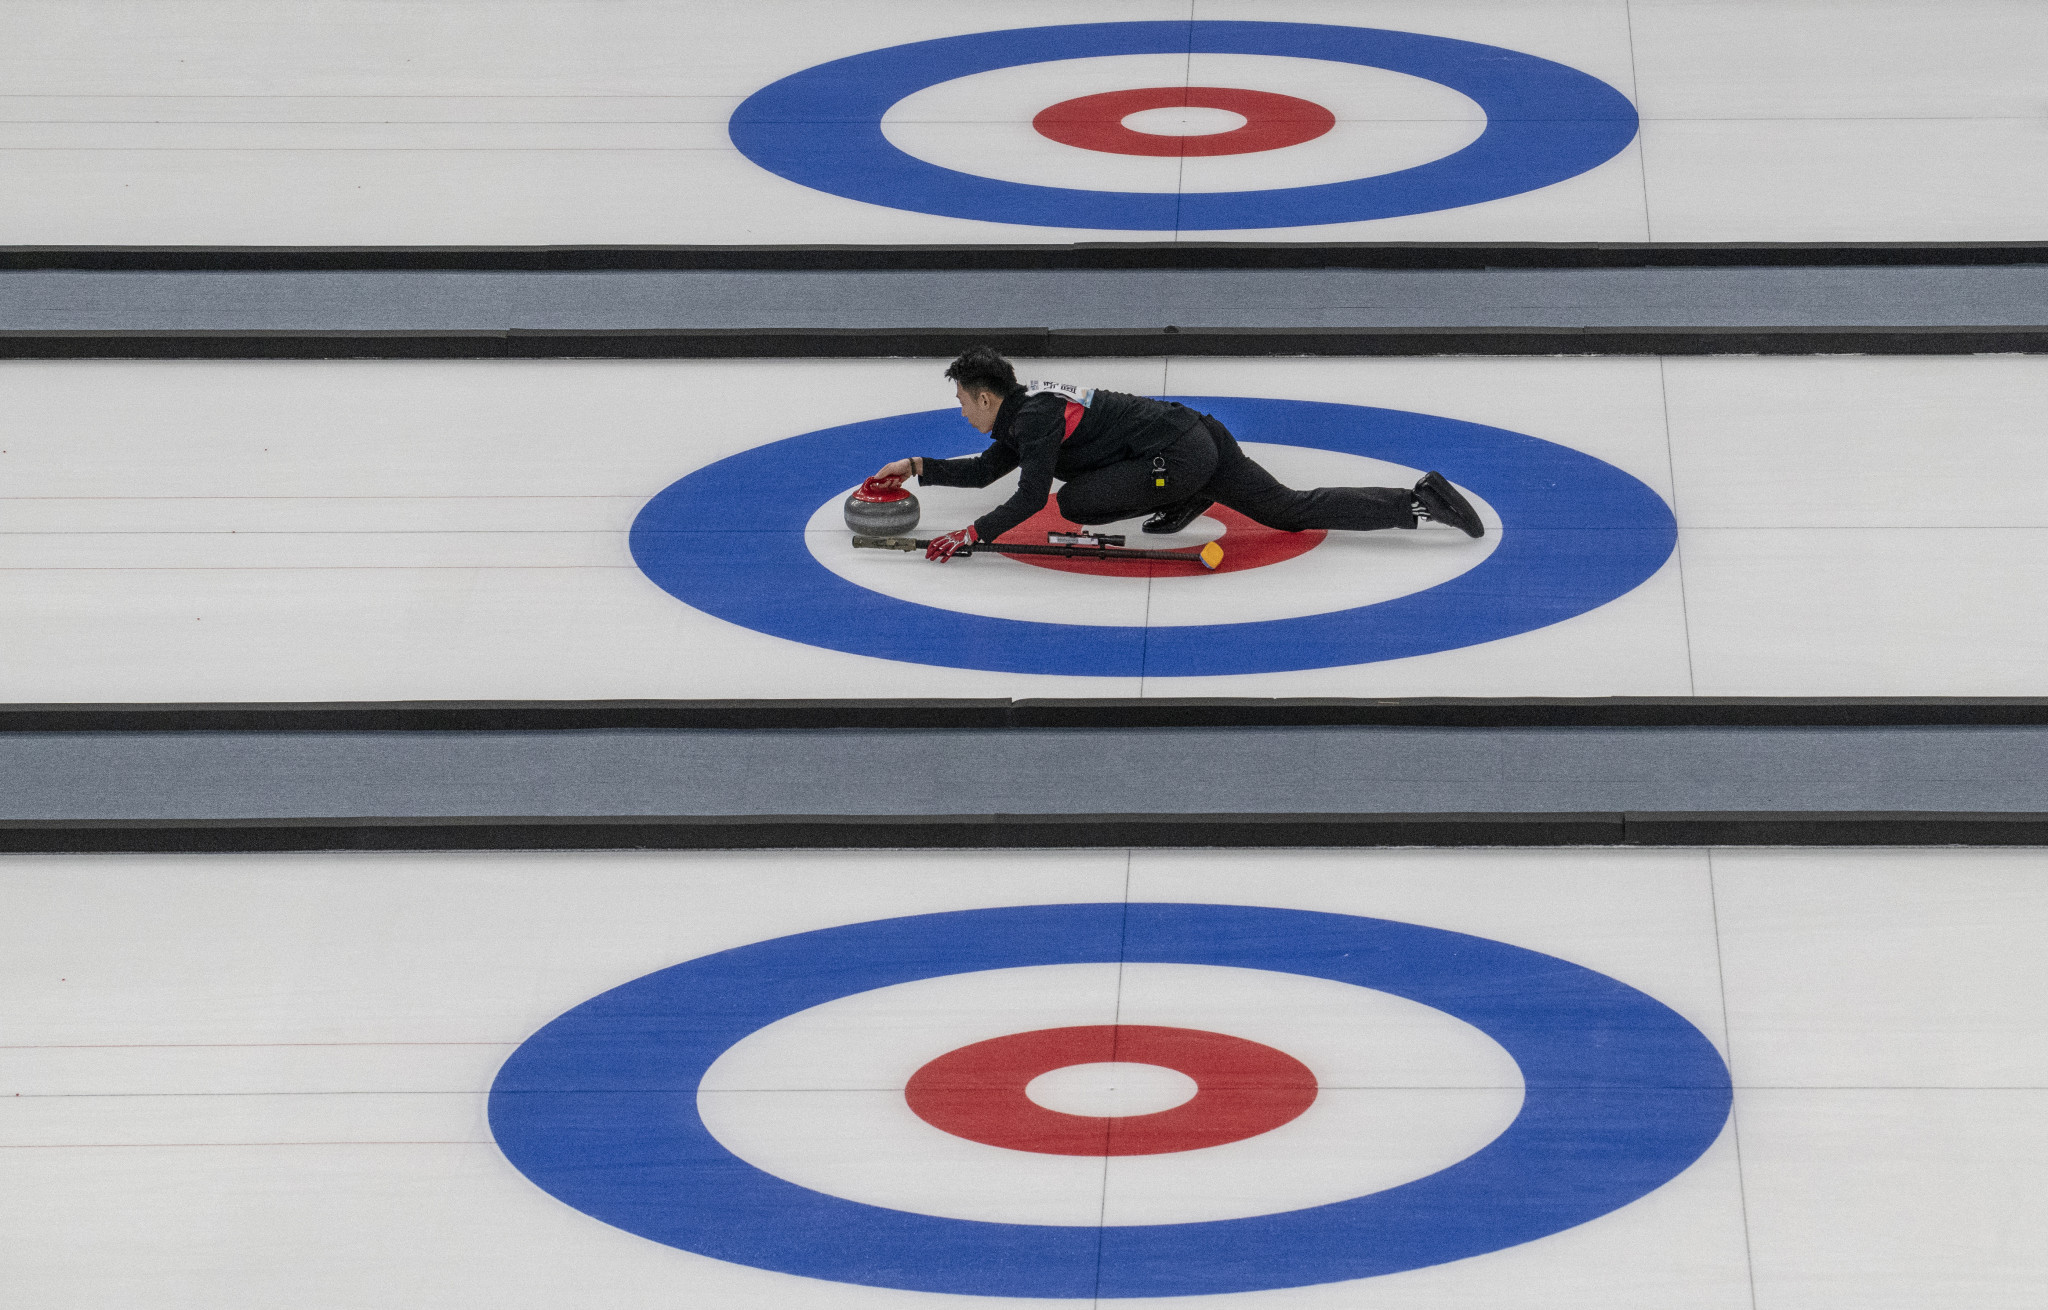 Domestic curling test events have been staged in China in advance of Beijing 2022 ©Getty Images